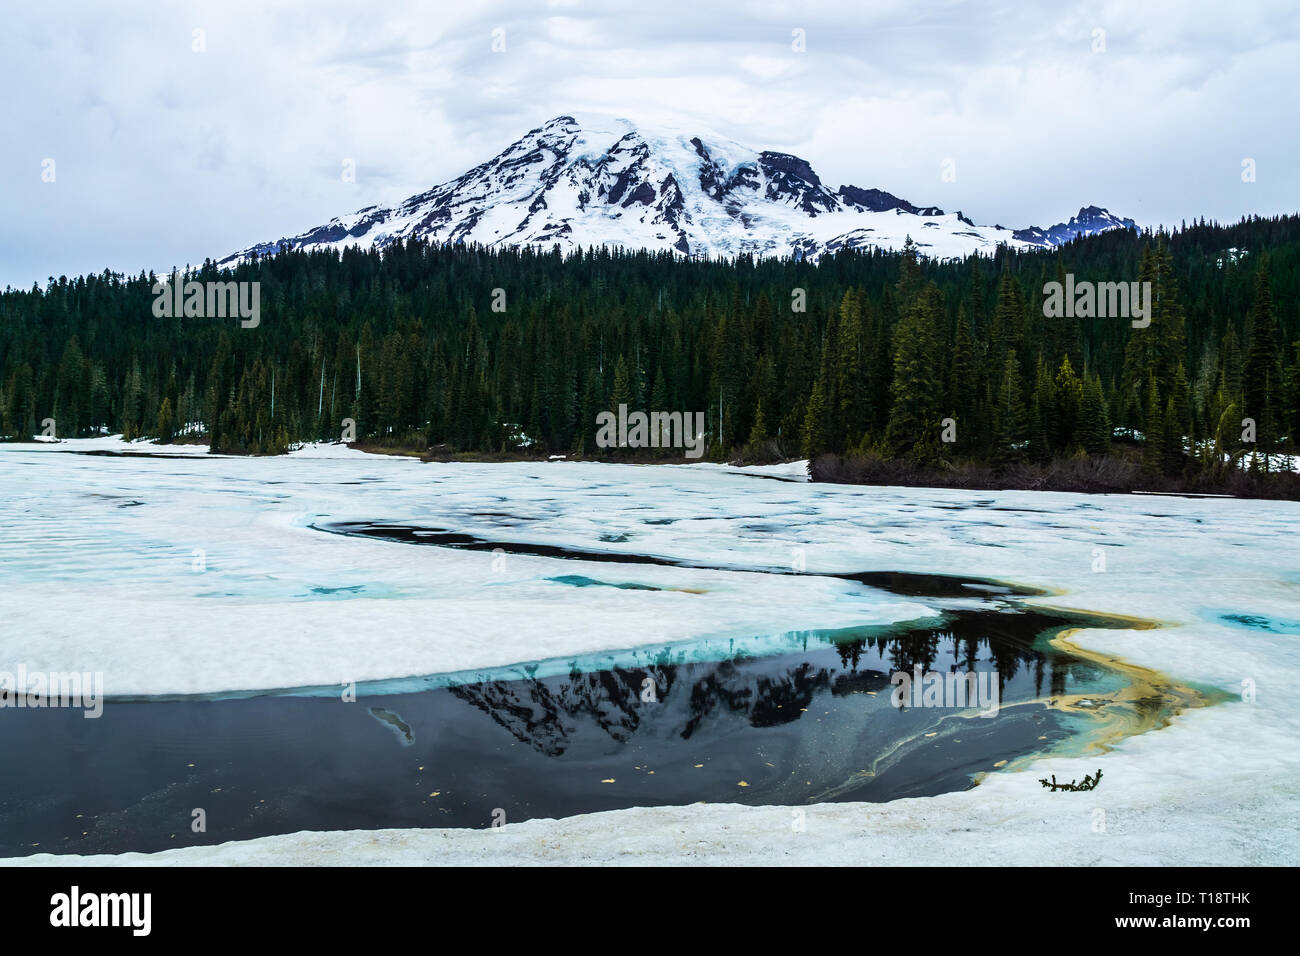 Snowy Mt. Rainier scenic landscape at Reflection Lakes on a wintry day in june, Mount Rainier National Park, WA, USA. Stock Photo